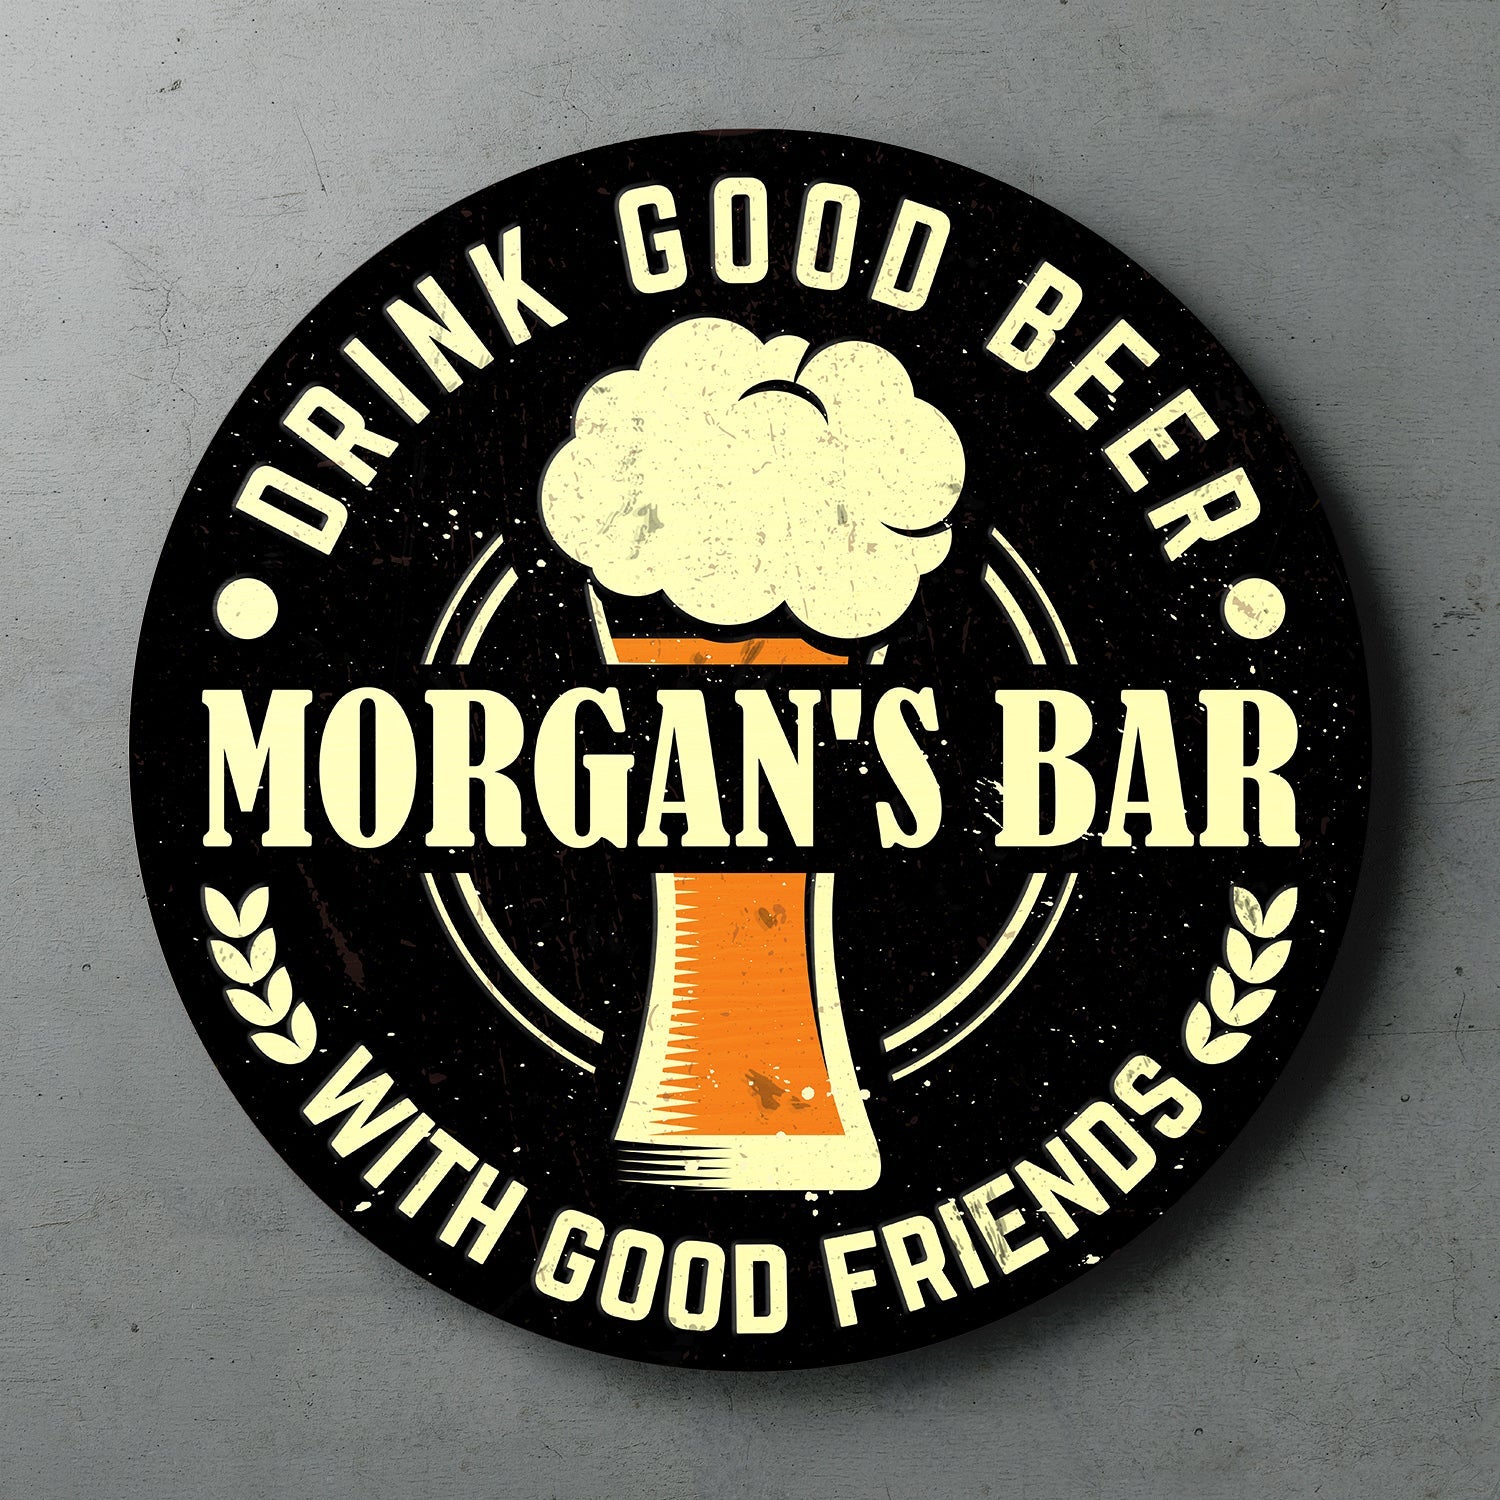 Drink Good Beer With Good Friends, Custom Round Sign